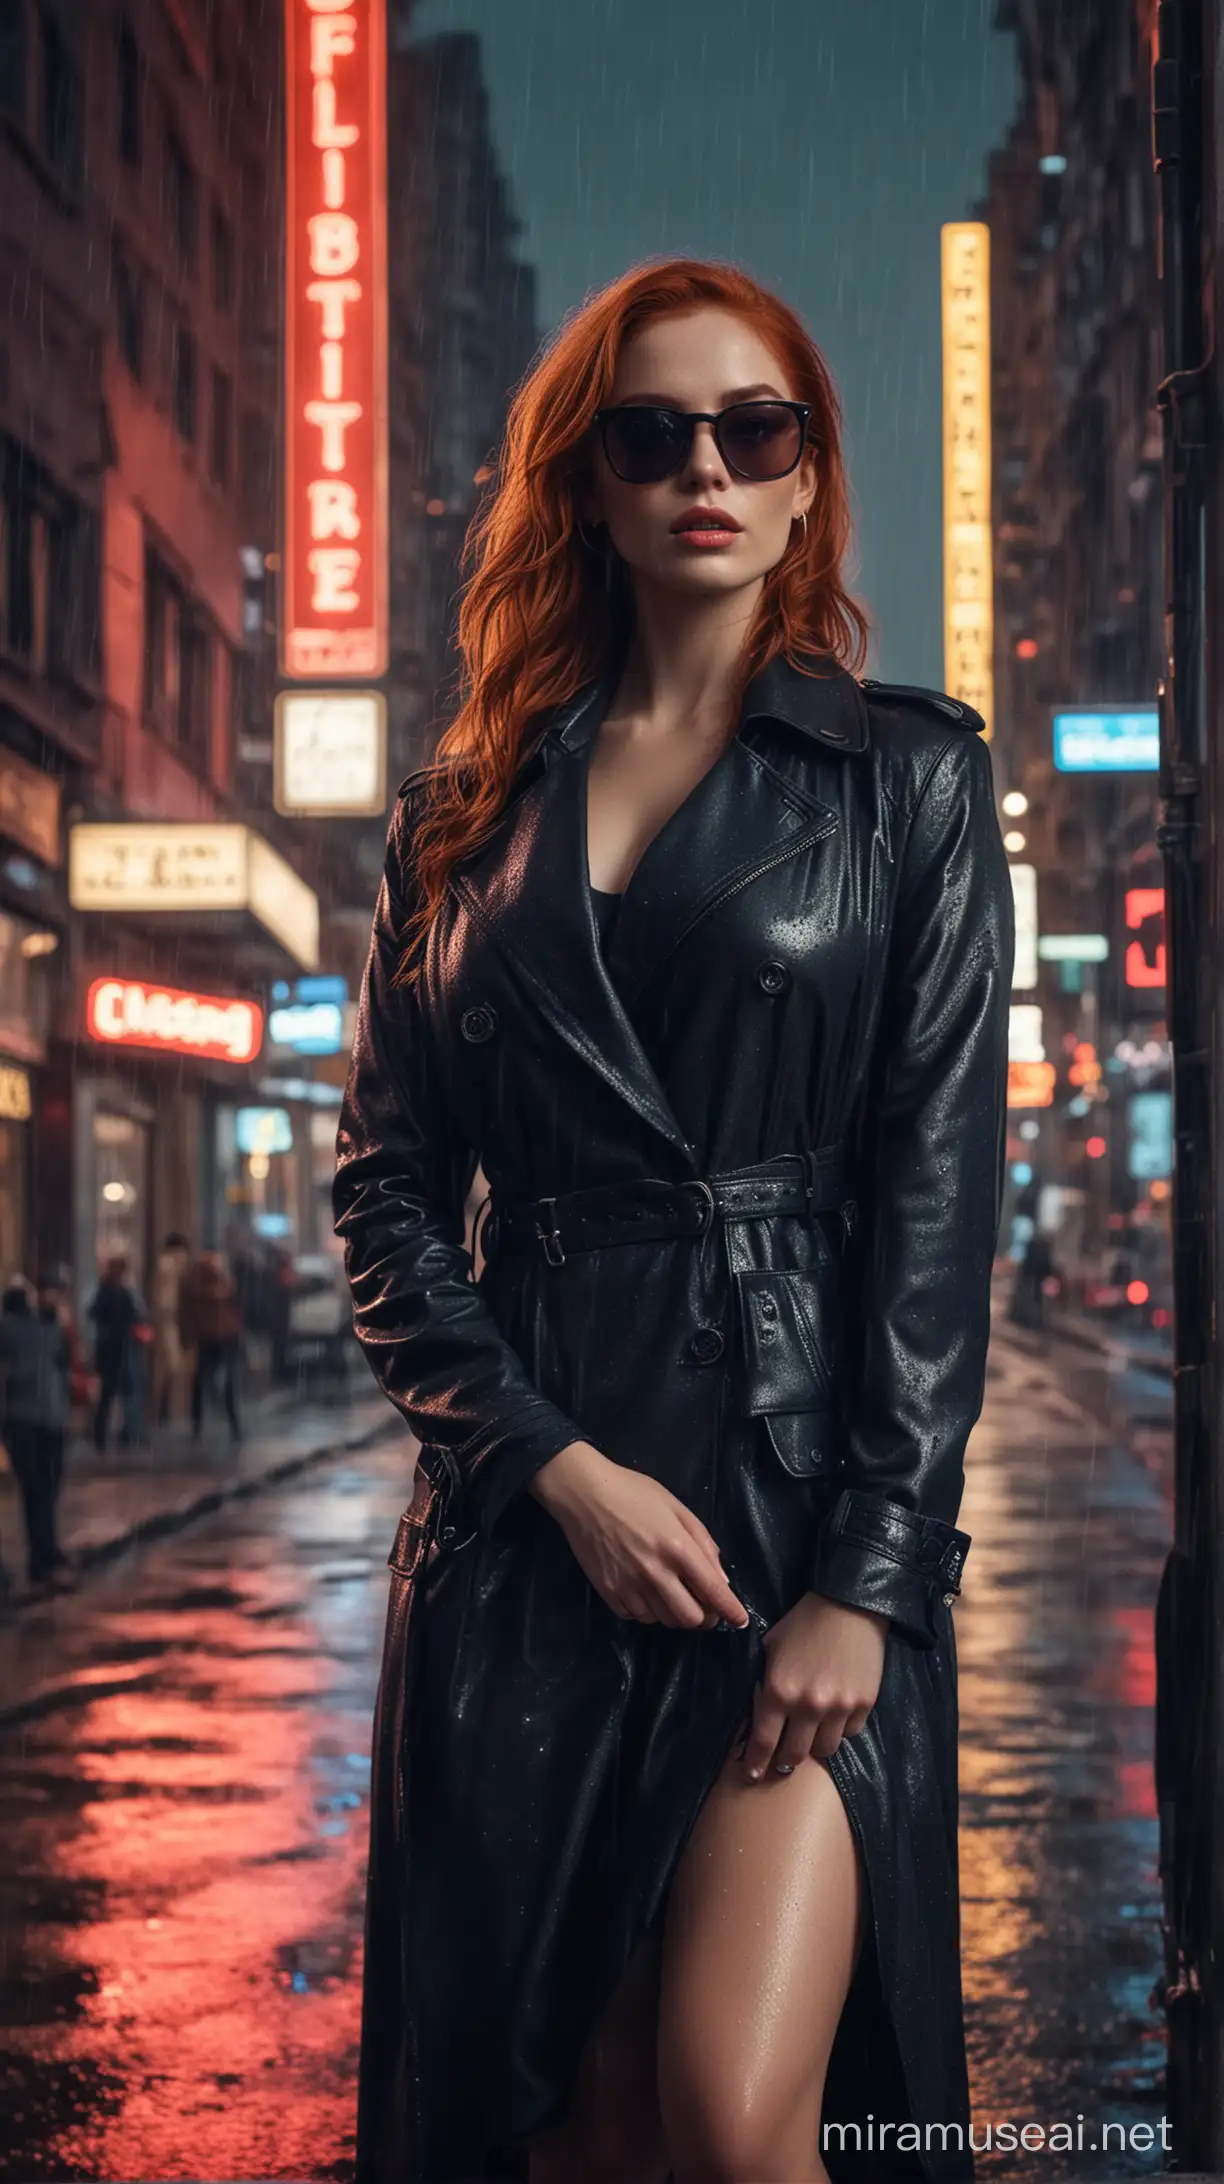 Mysterious RedHaired Detective Woman with Intriguing Sign in Rainy Urban Landscape